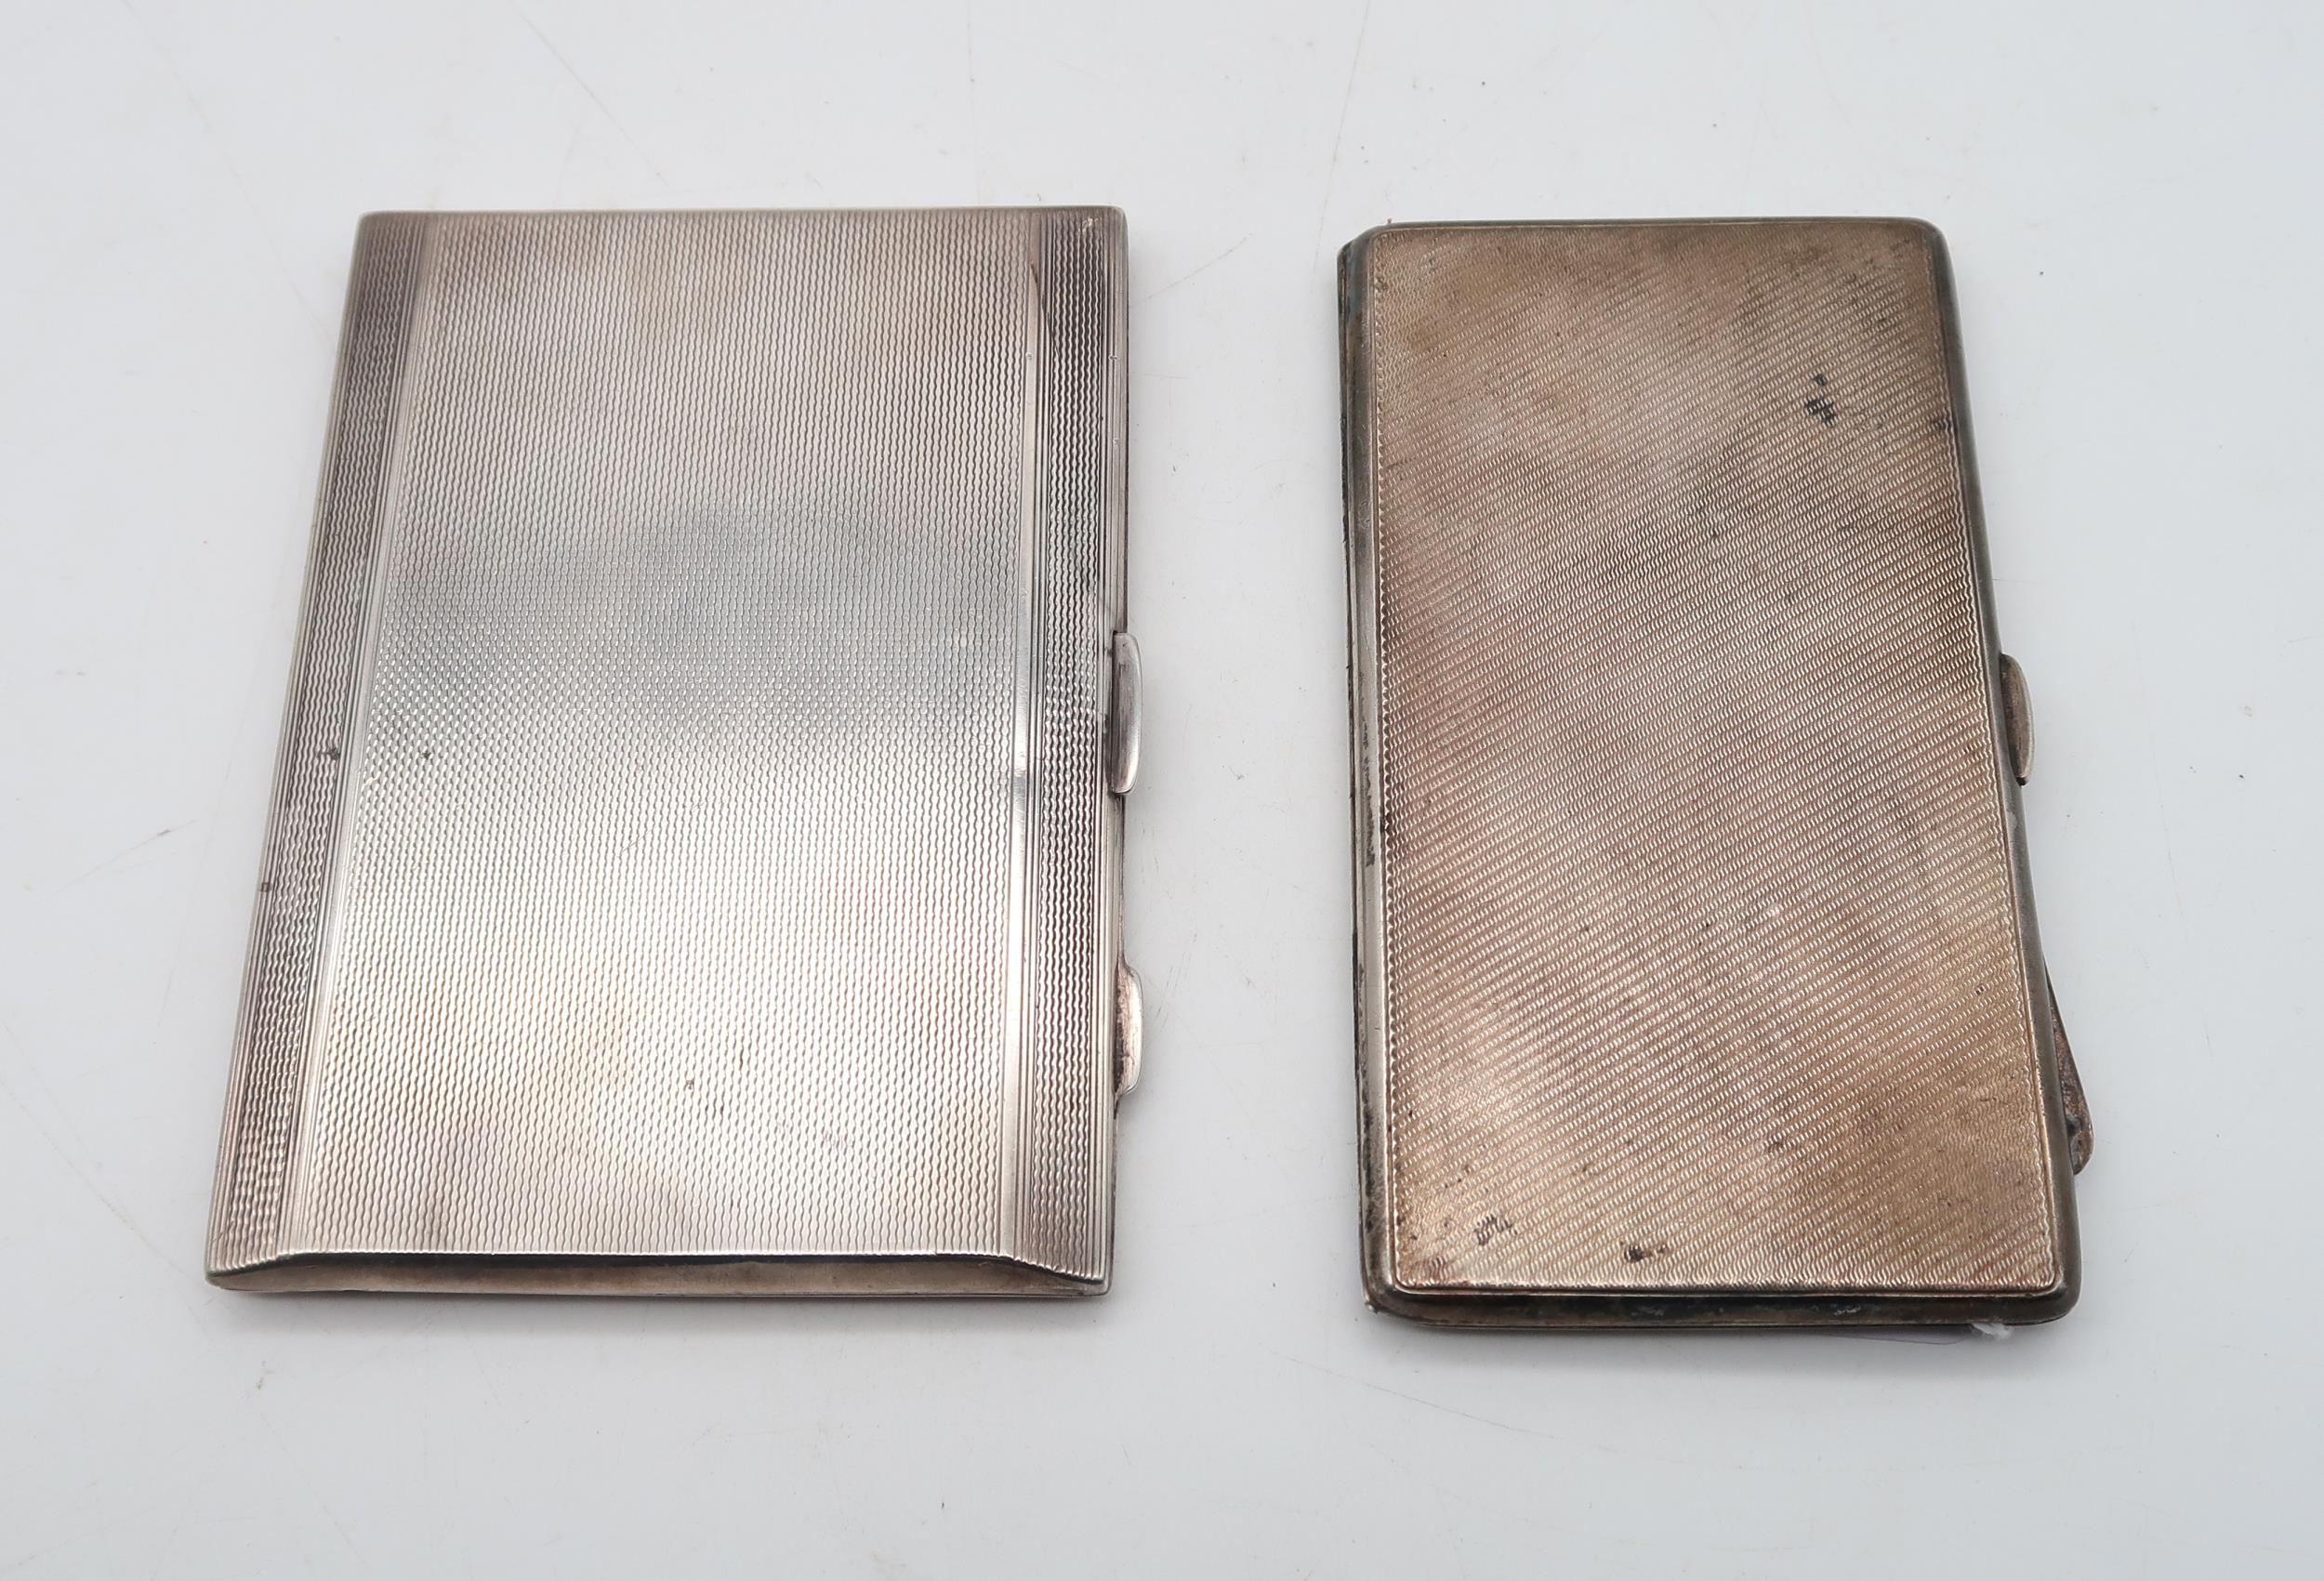 A George V silver cigarette case, by Samuel M Levi Ltd, Birmingham 1935, with engined turned